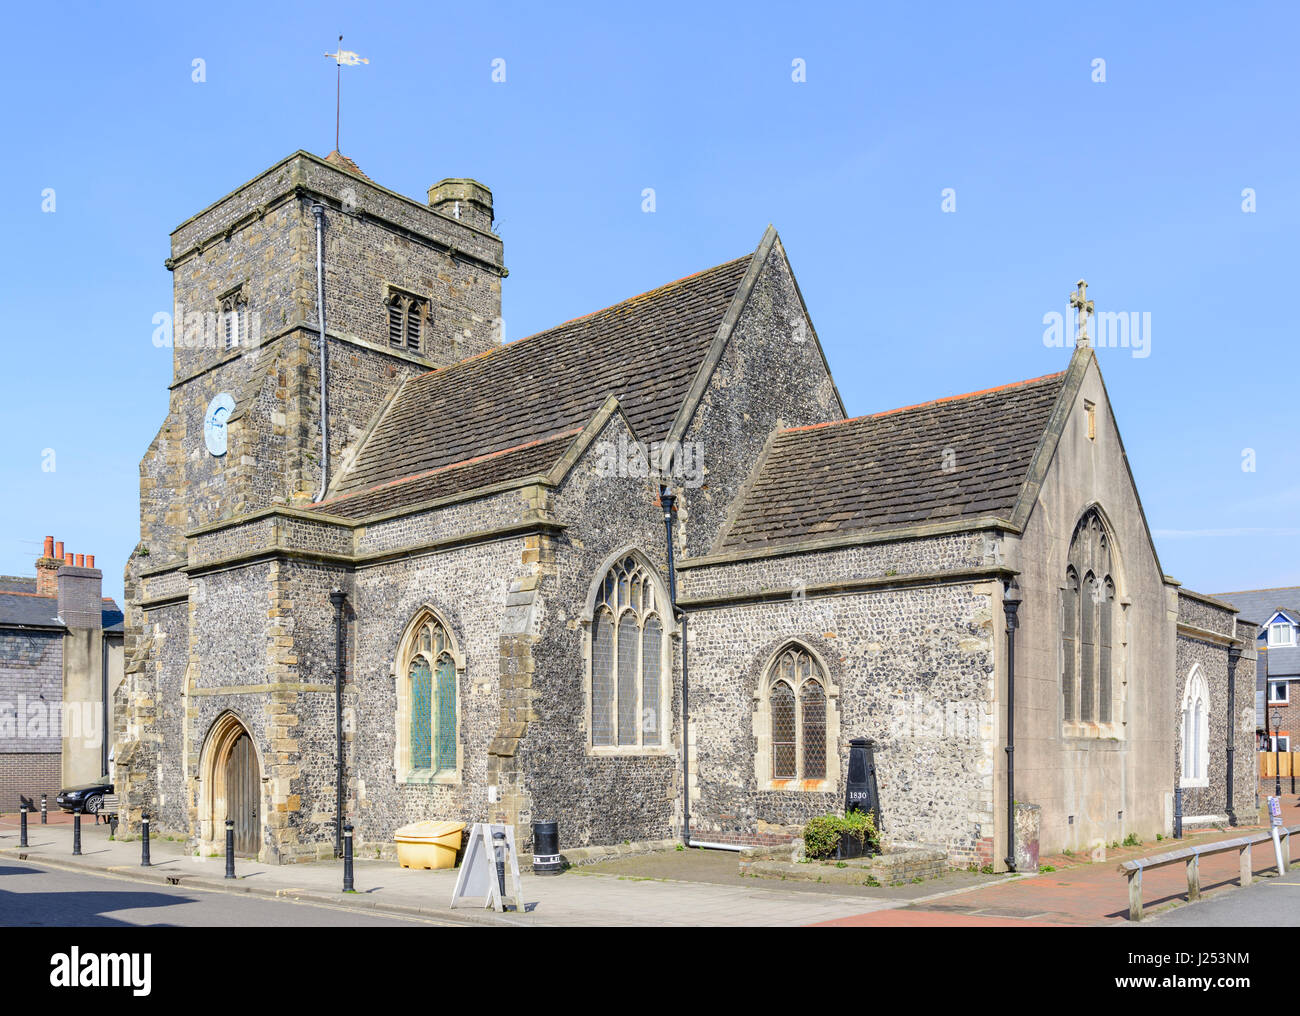 Anglican Parish Church of St Thomas à Becket in Lewes, East Sussex, England, UK. Stock Photo